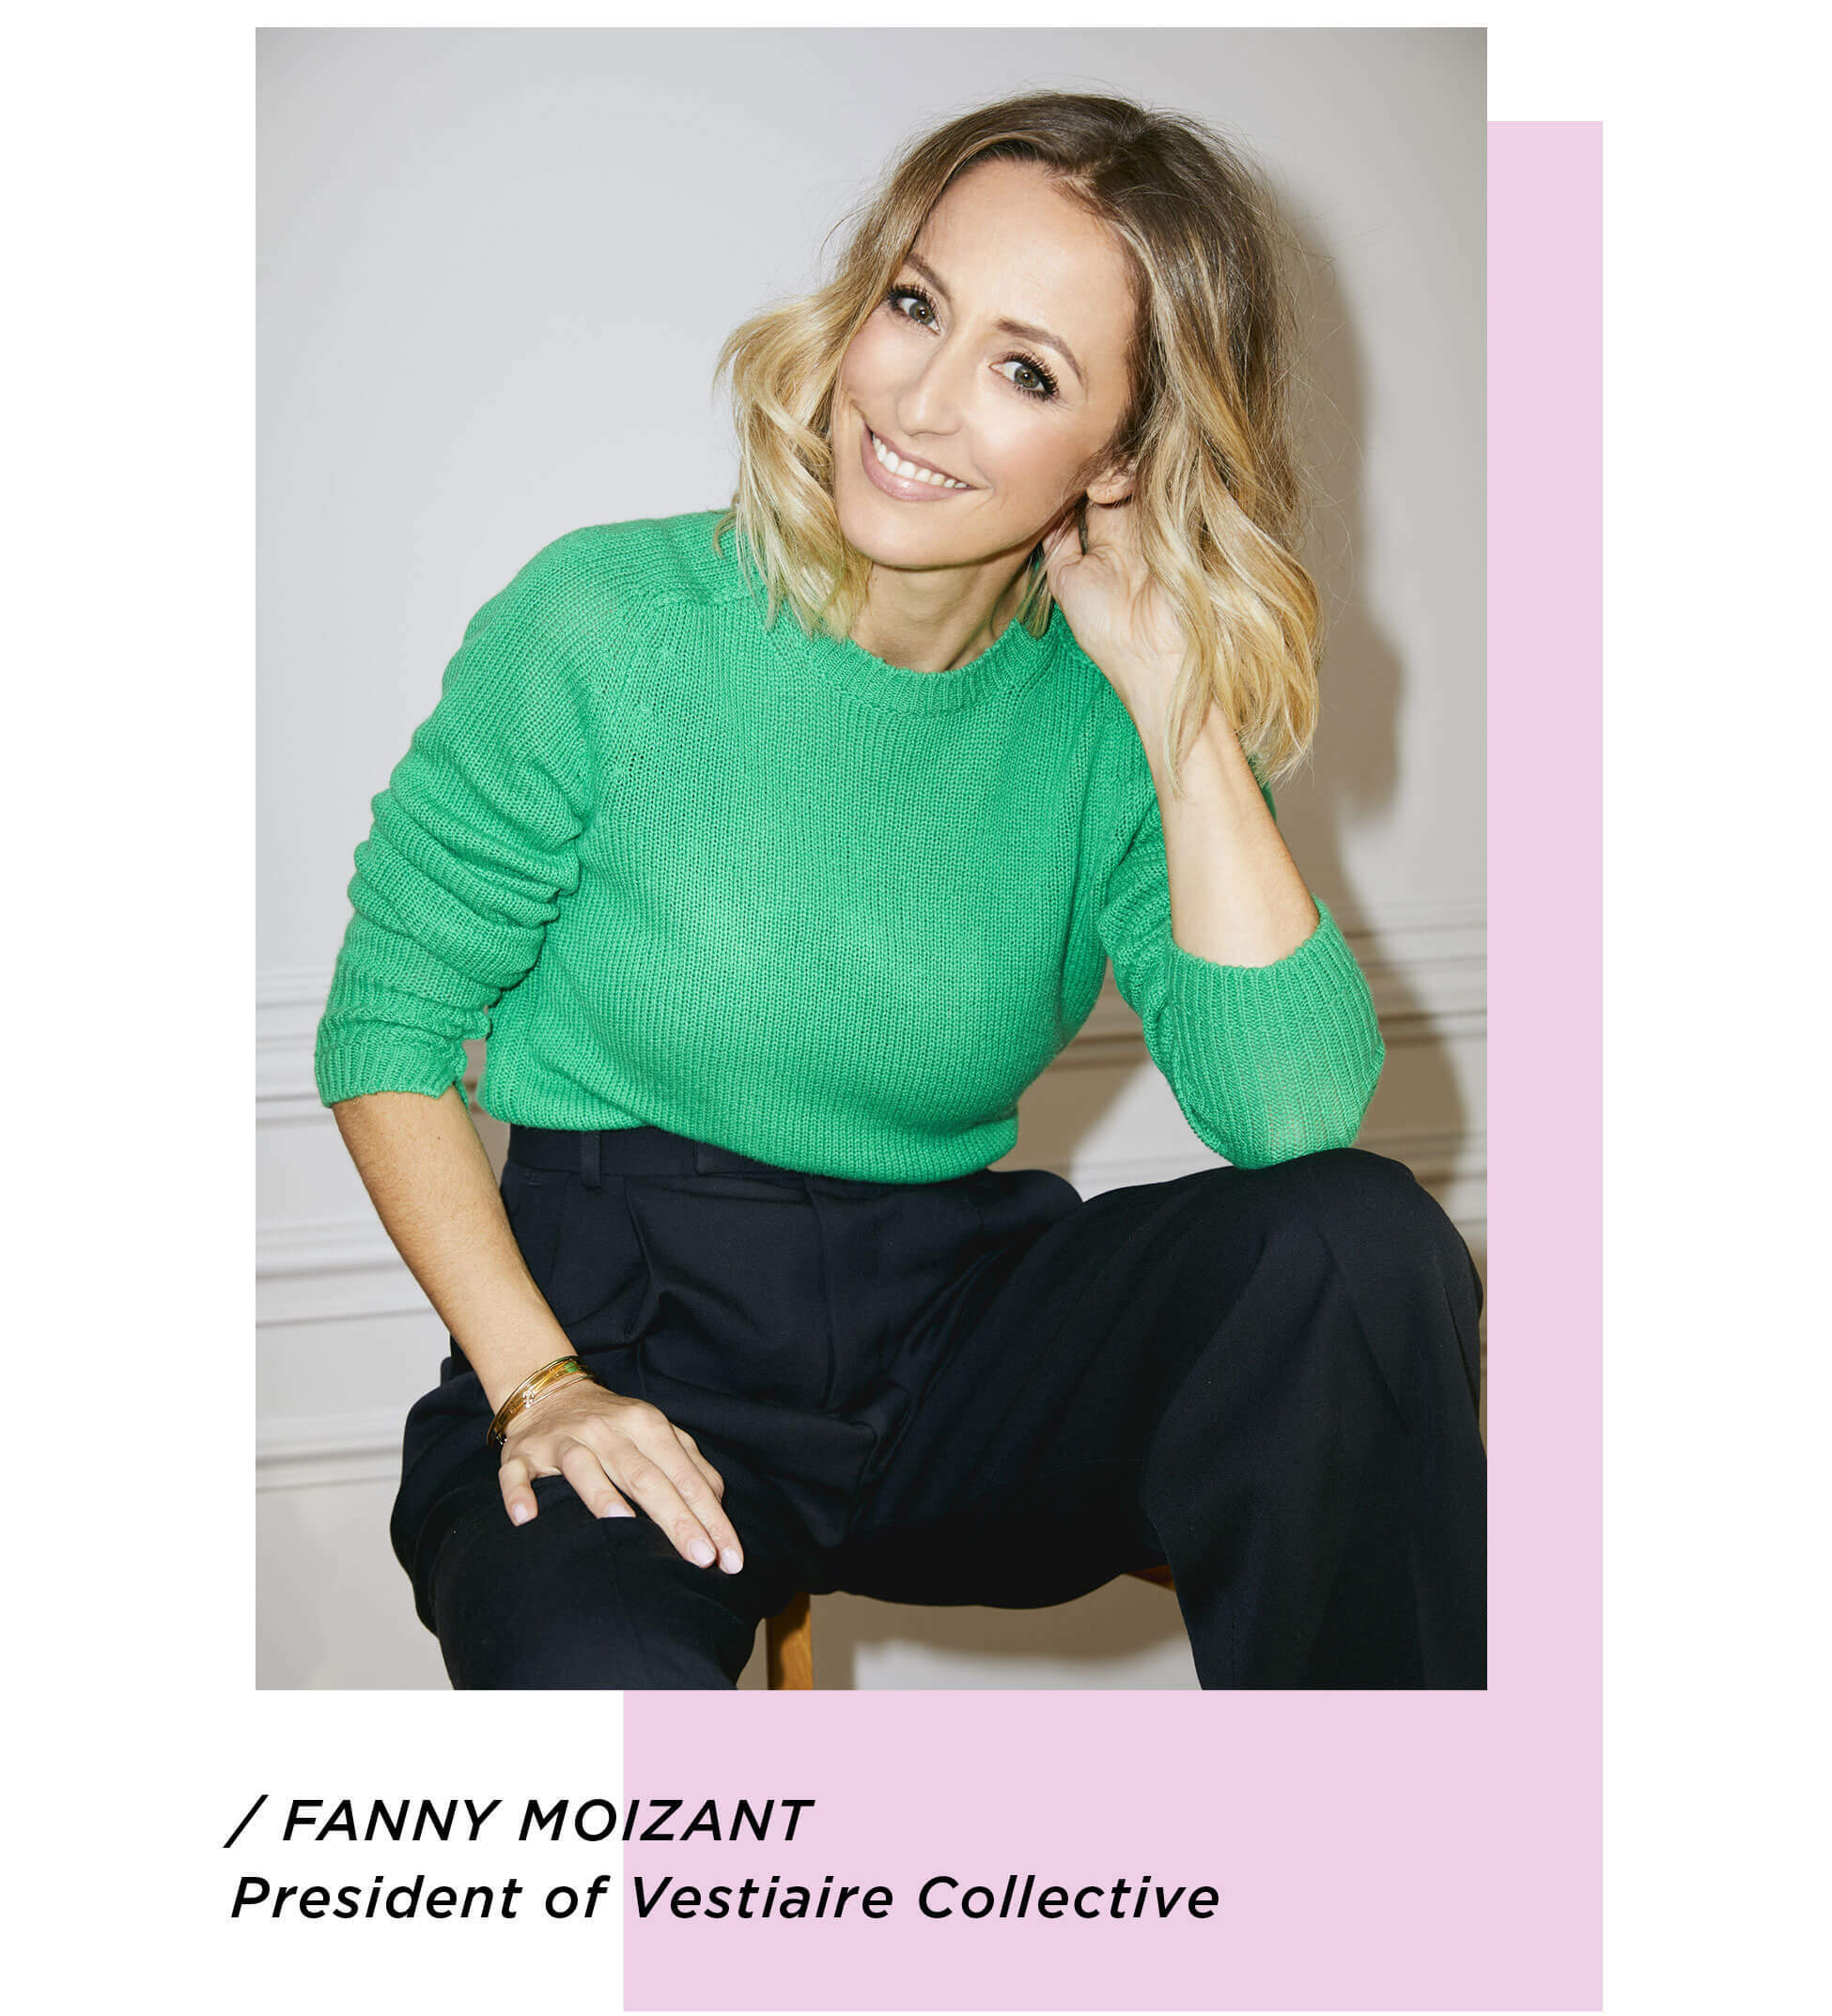 Vestiaire Collective Co-founder Sophie Hersan on Circular Fashion